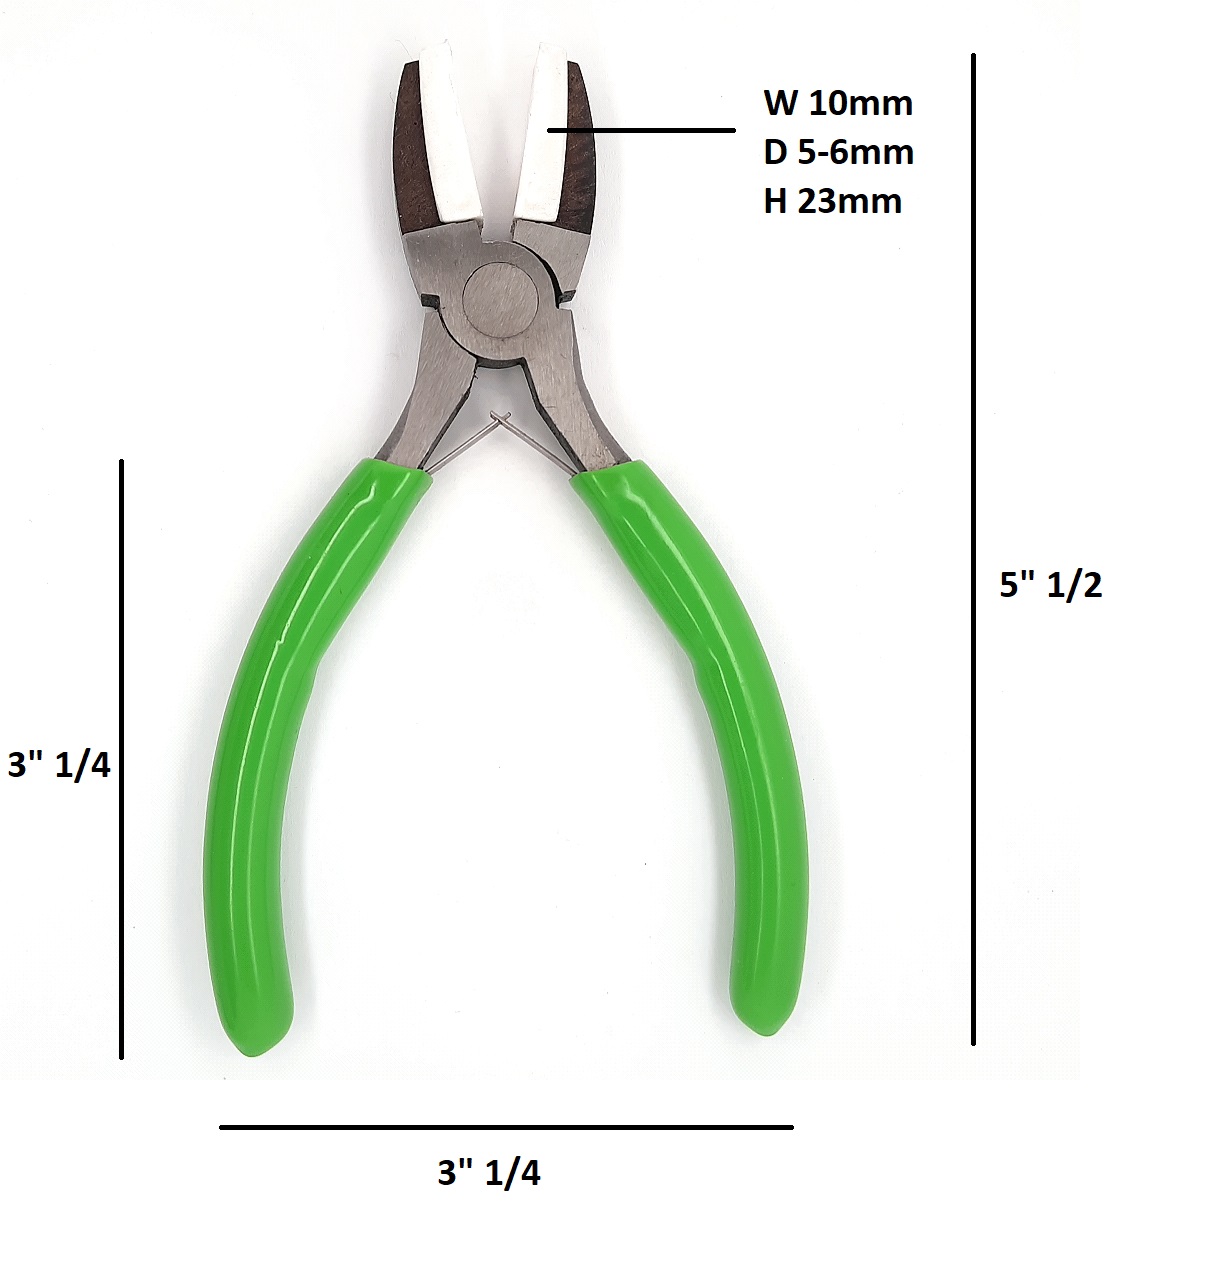 Slim Line Long Needle Nose Pliers, 5 1/2 in Long, 1 3/4 in Jaw